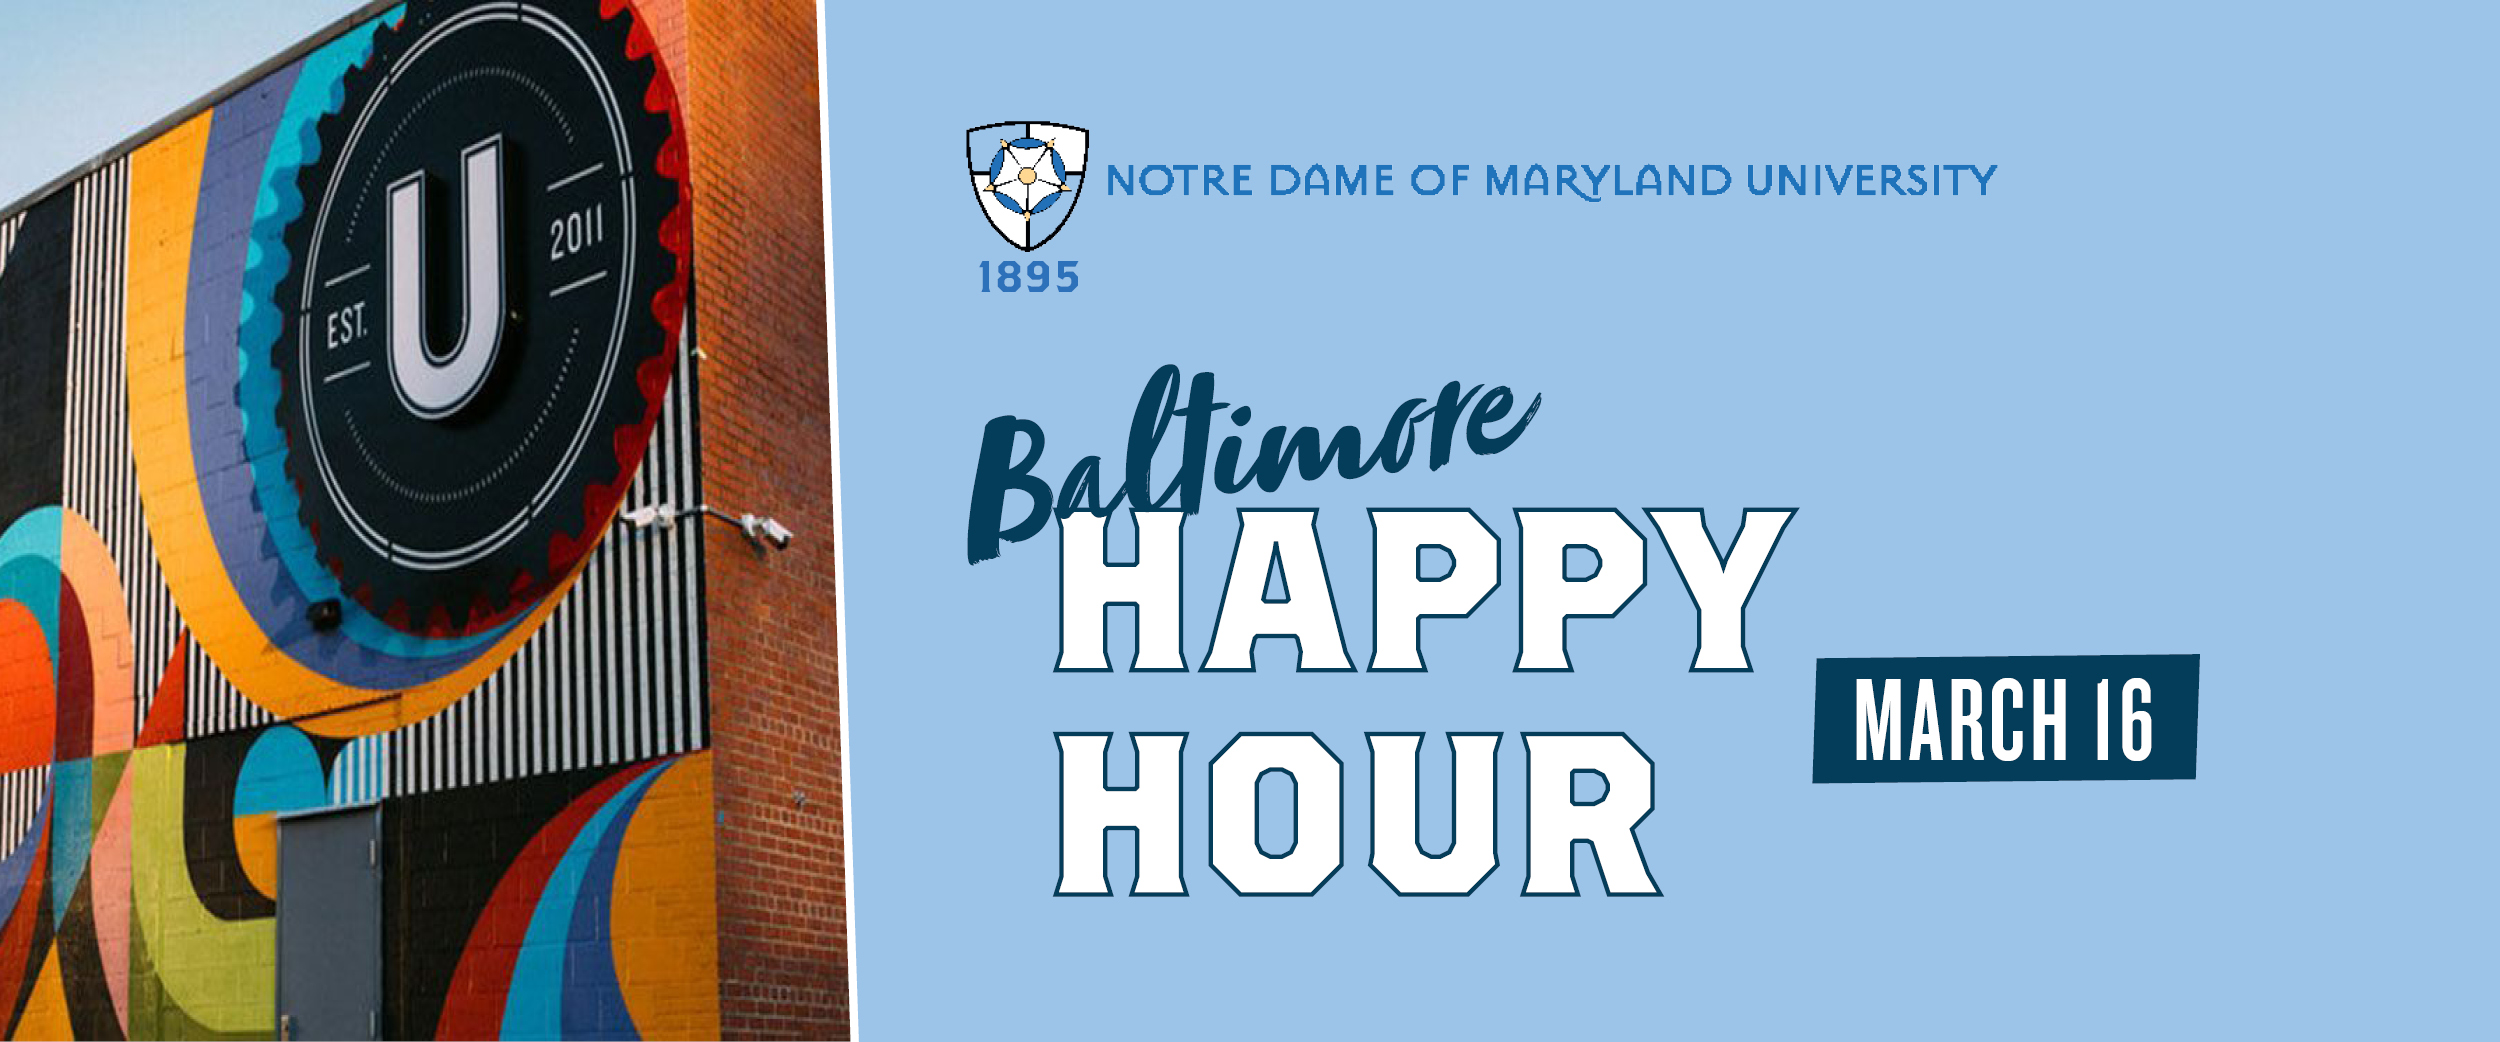 Baltimore Happy Hour March 16